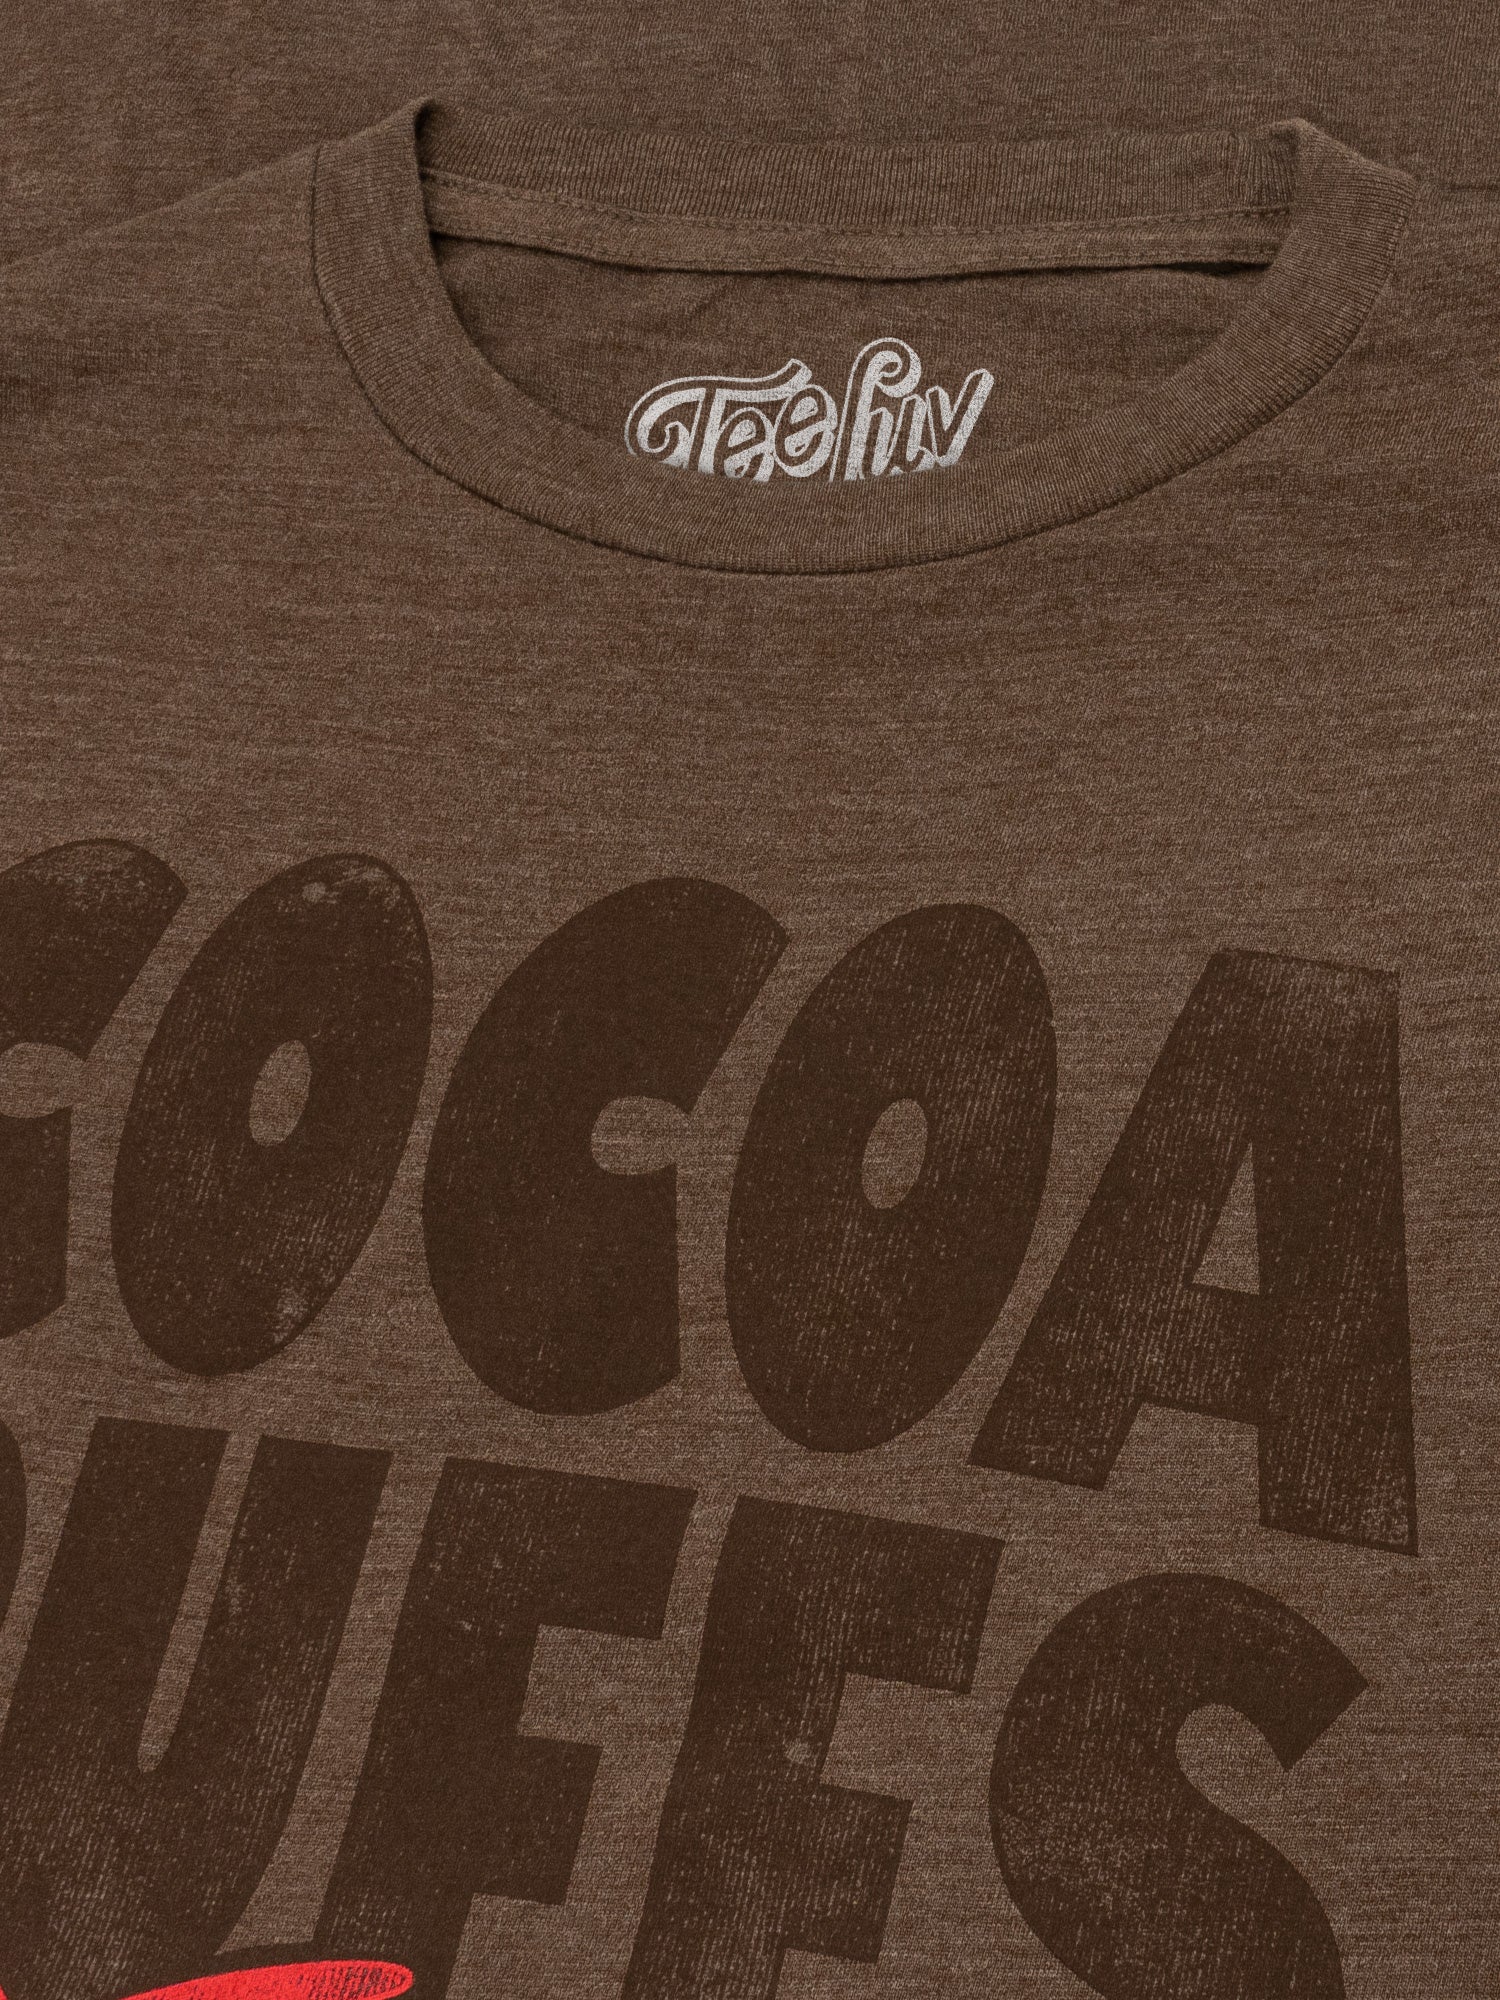 I'm Cuckoo For Cocoa Puffs T-shirt - Brown – Tee Luv